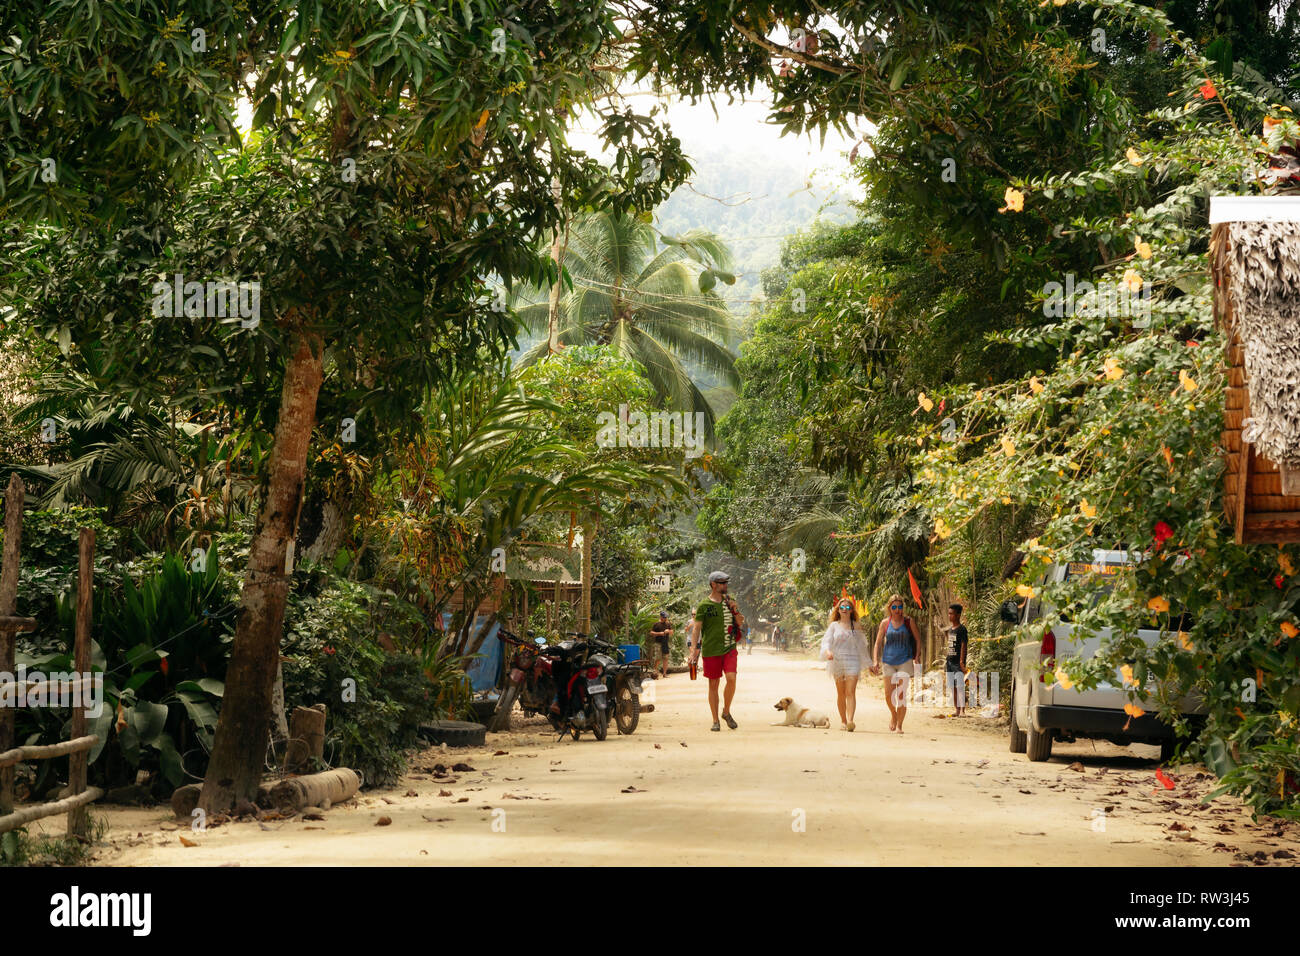 Port Barton, Palawan, Philippines - February 3, 2019: People walk along street with dirt road in traditional Philippine village Stock Photo